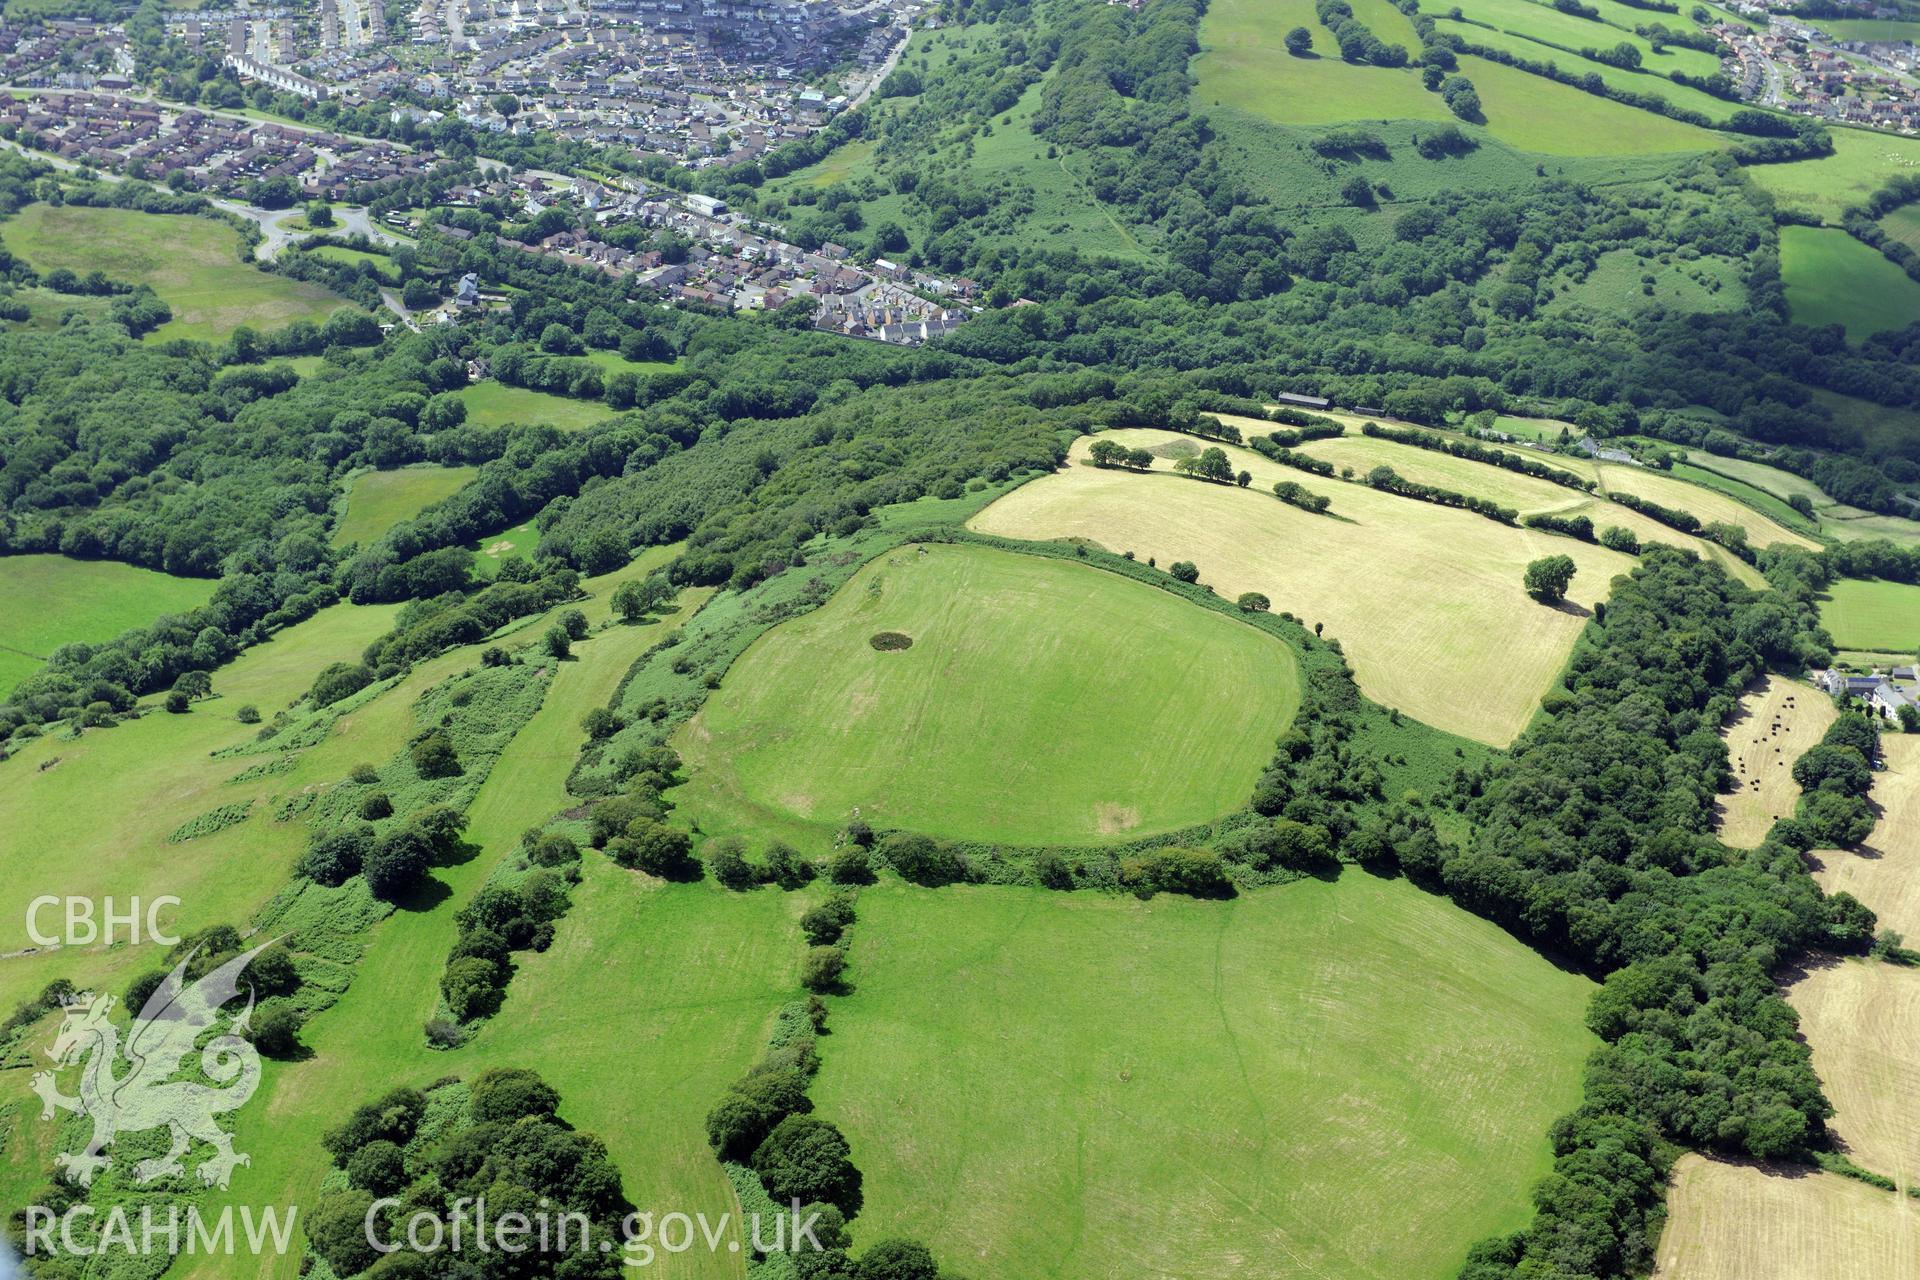 Caerau Hillfort and supposed site of battle, Rhiwsaeson, Llantrisant. Oblique aerial photograph taken during the Royal Commission's programme of archaeological aerial reconnaissance by Toby Driver on 29th June 2015.